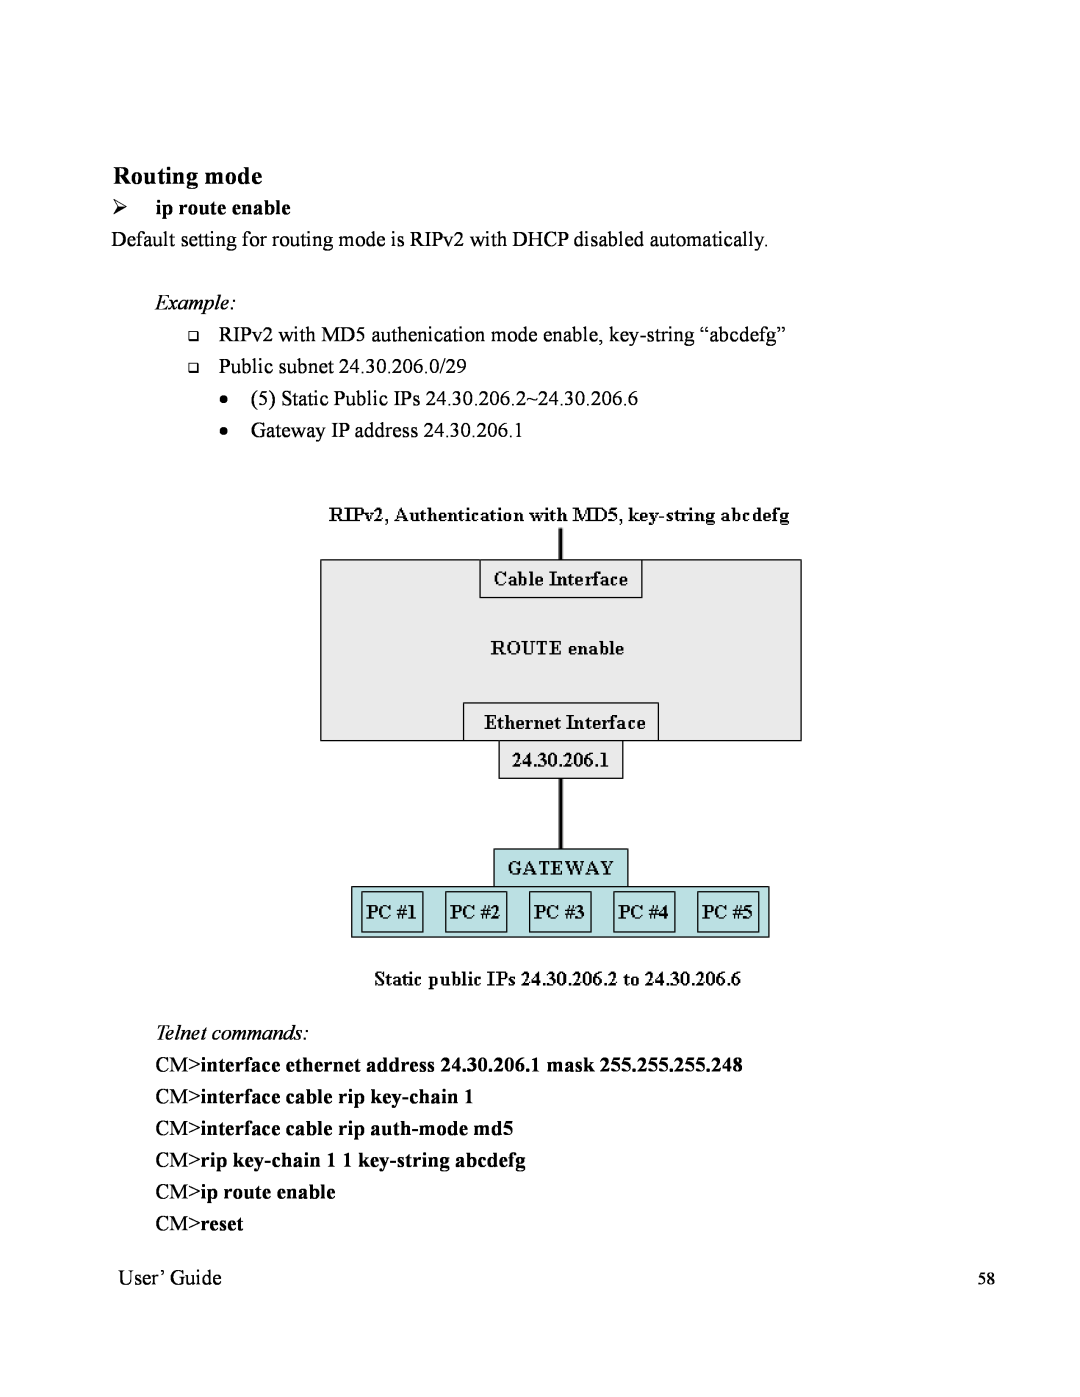 Orion 2000 manual Routing mode, ¾ ip route enable, CMinterface ethernet address 24.30.206.1 mask, Example, Telnet commands 